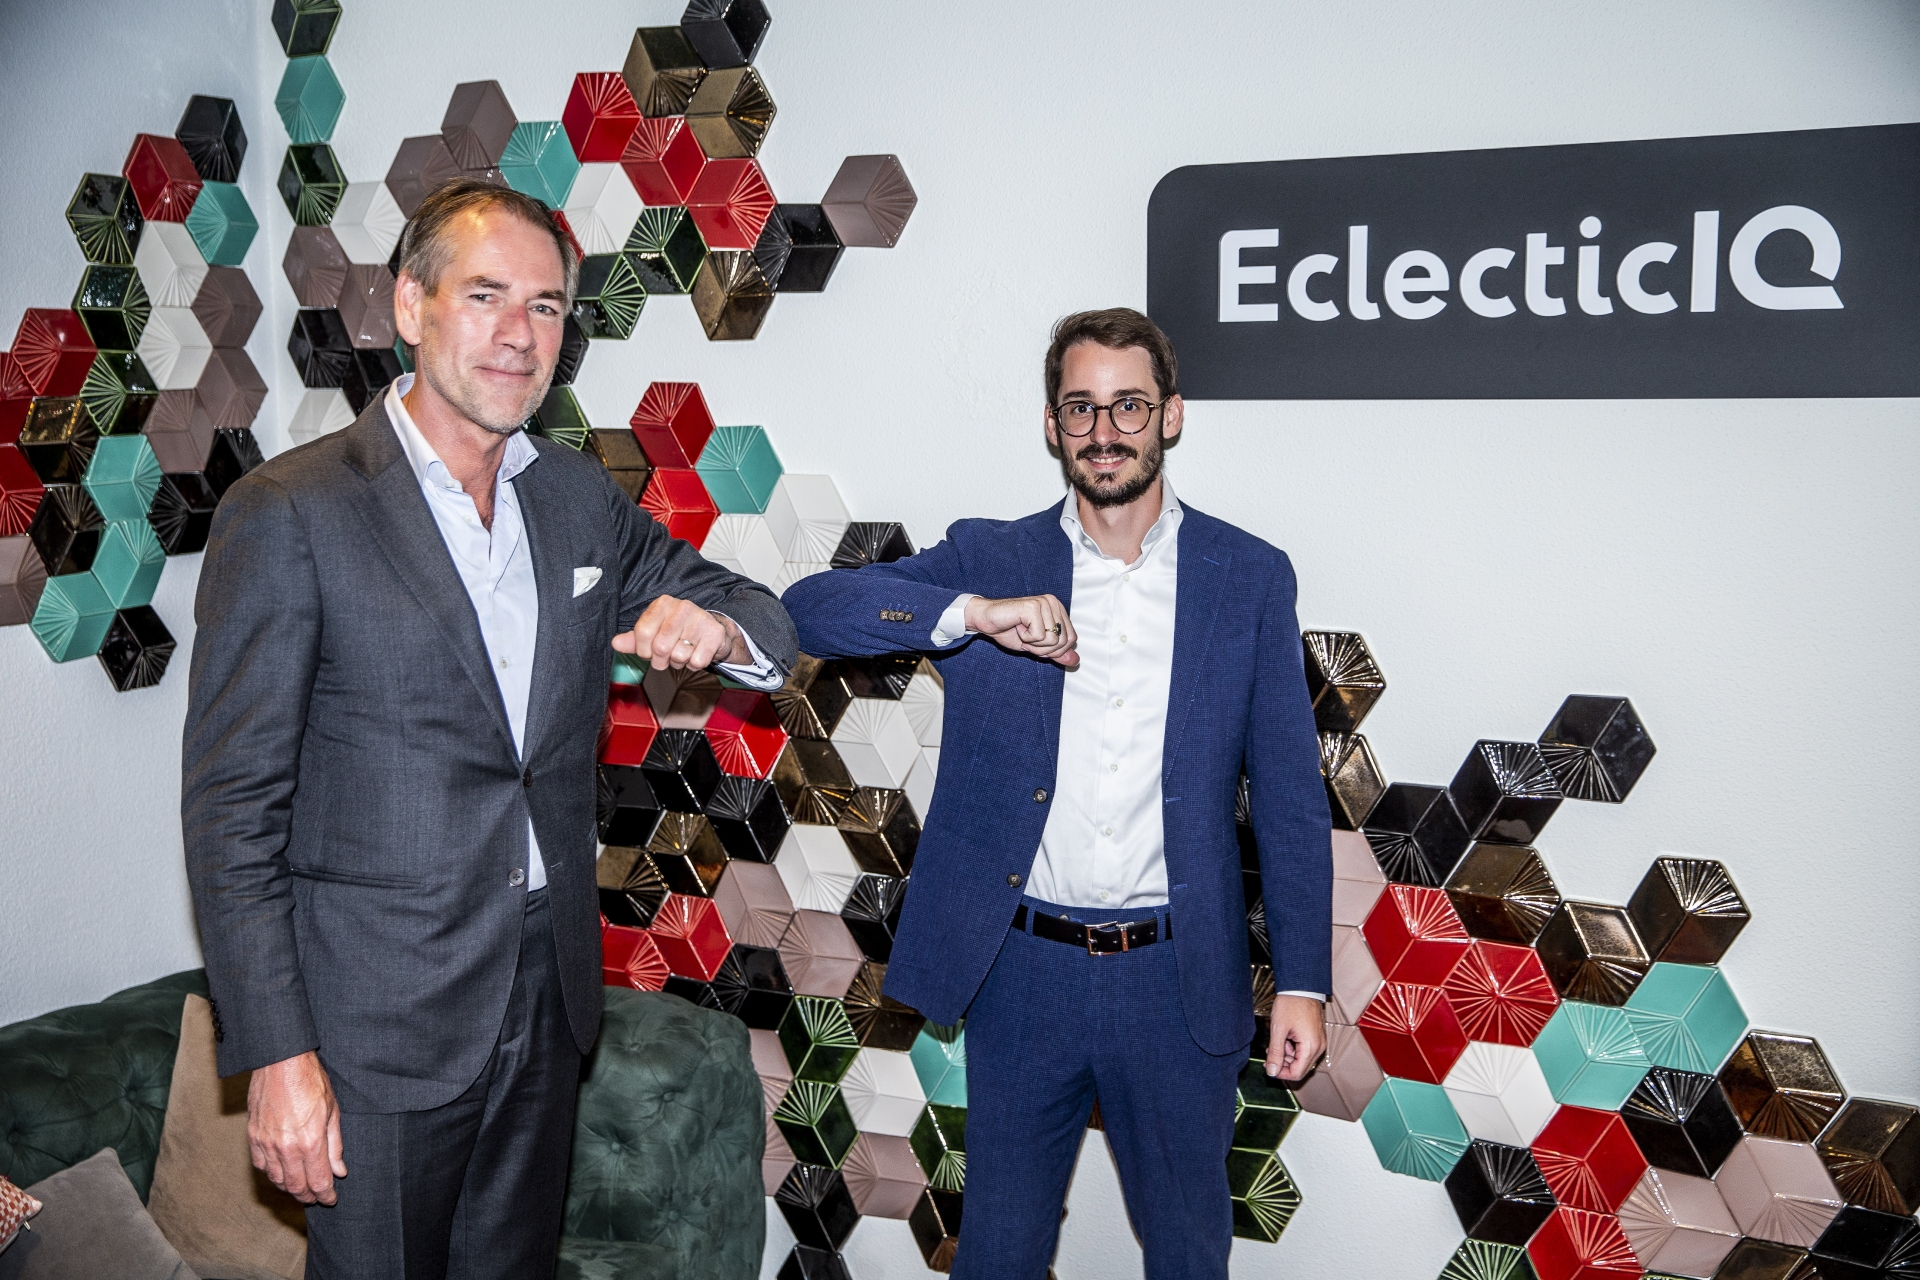 Dutch Security TechFund Invests Close to € 3 Million in EclecticIQ